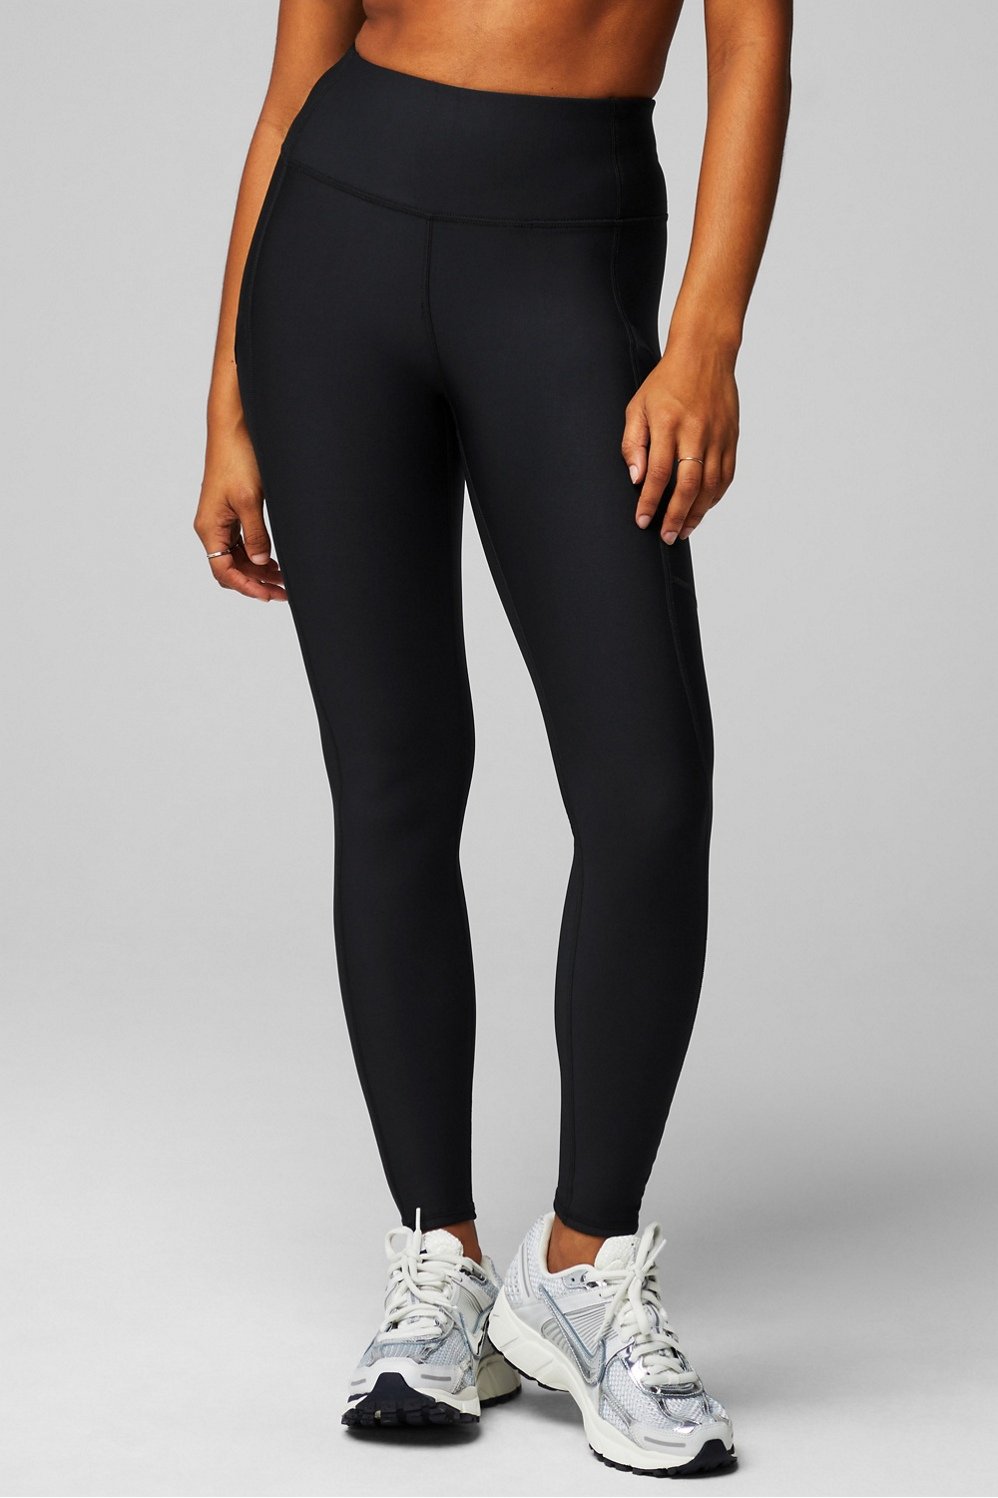 Cold Weather High-Waisted Pocket Legging - - Fabletics Canada